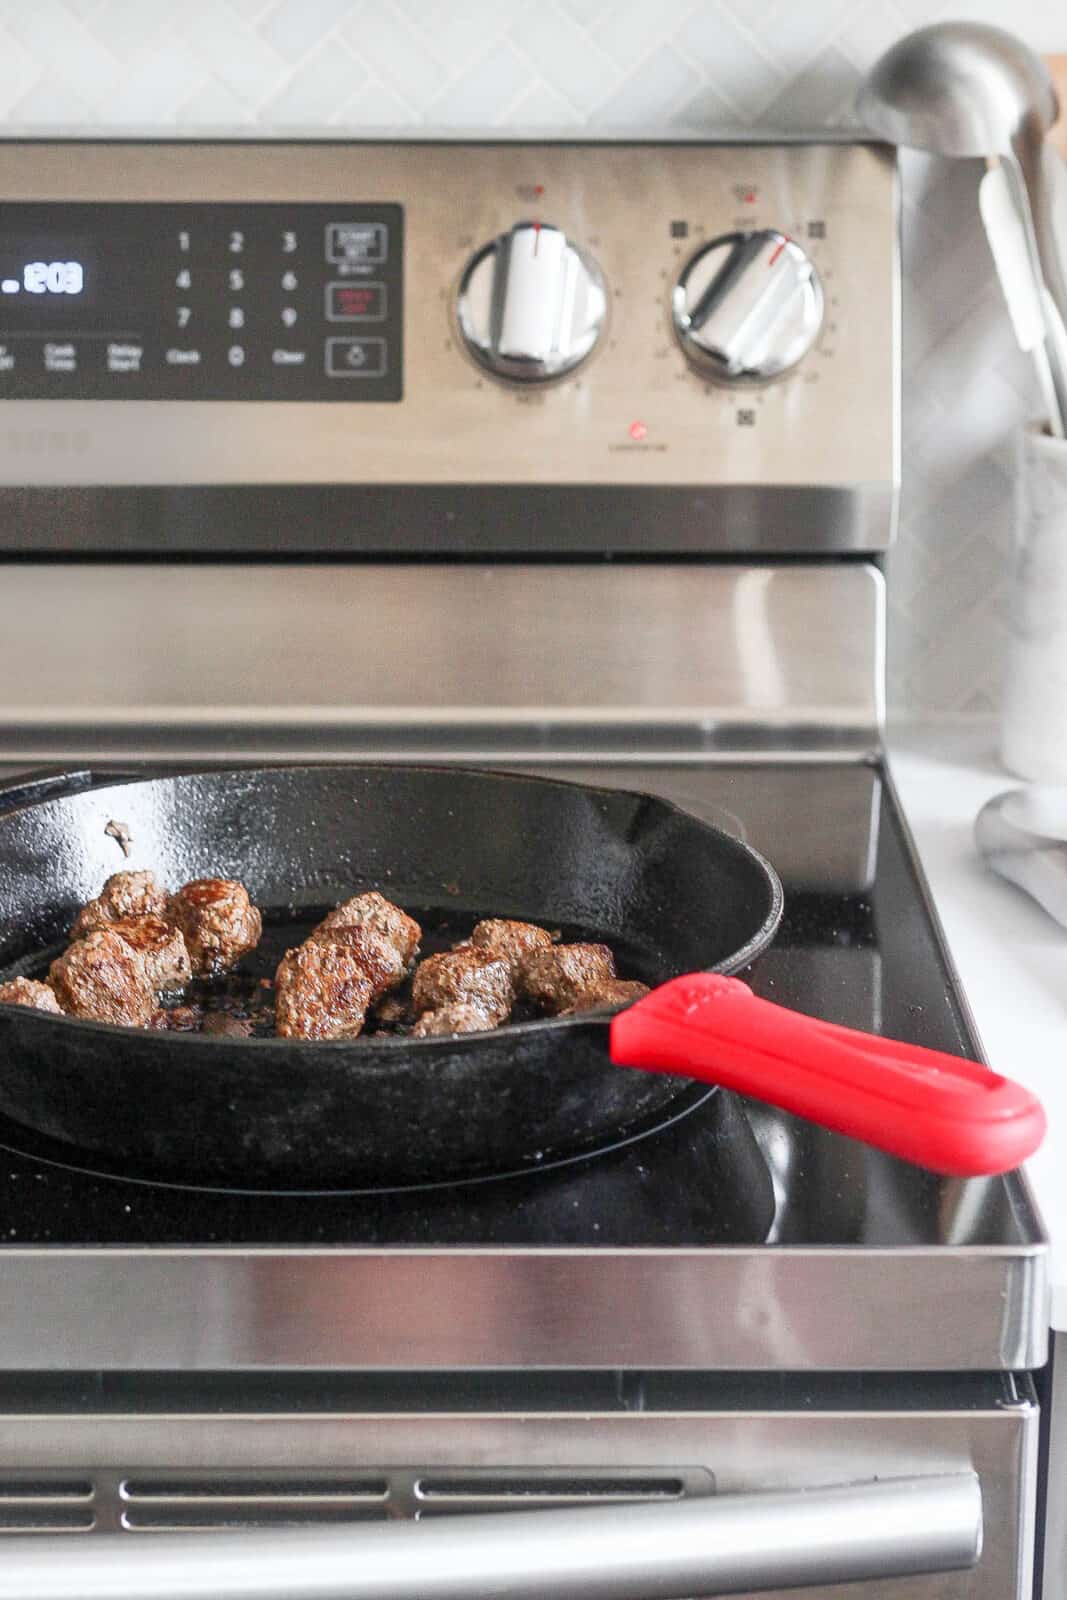 Meatballs cooking in a cast iron skillet on the stove top.